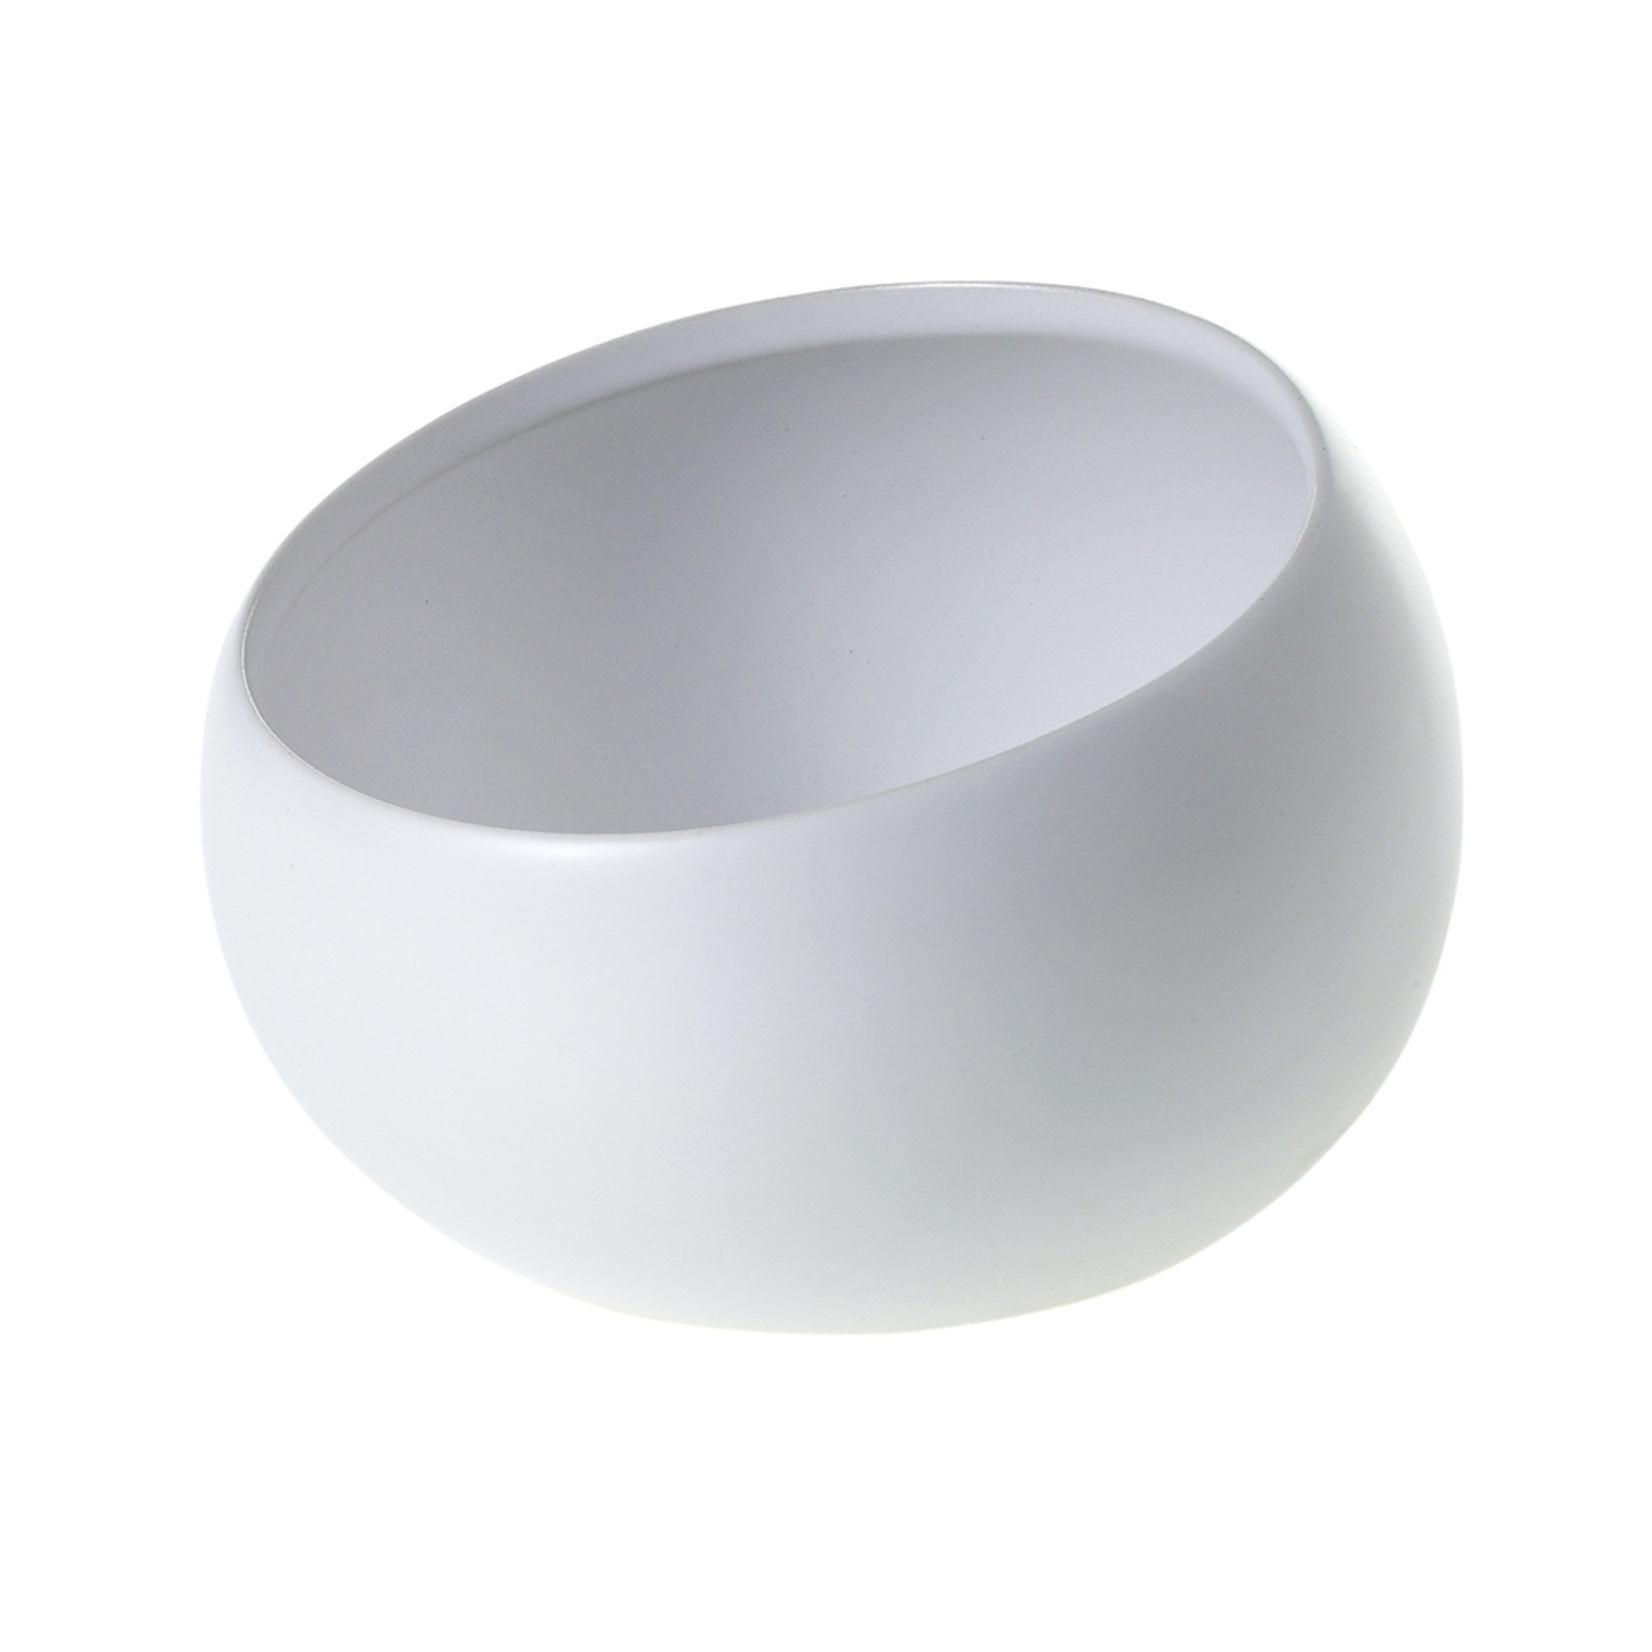 5.25"x 3.5”H WHITE Simply Collection ANGLED BOWL (AD)